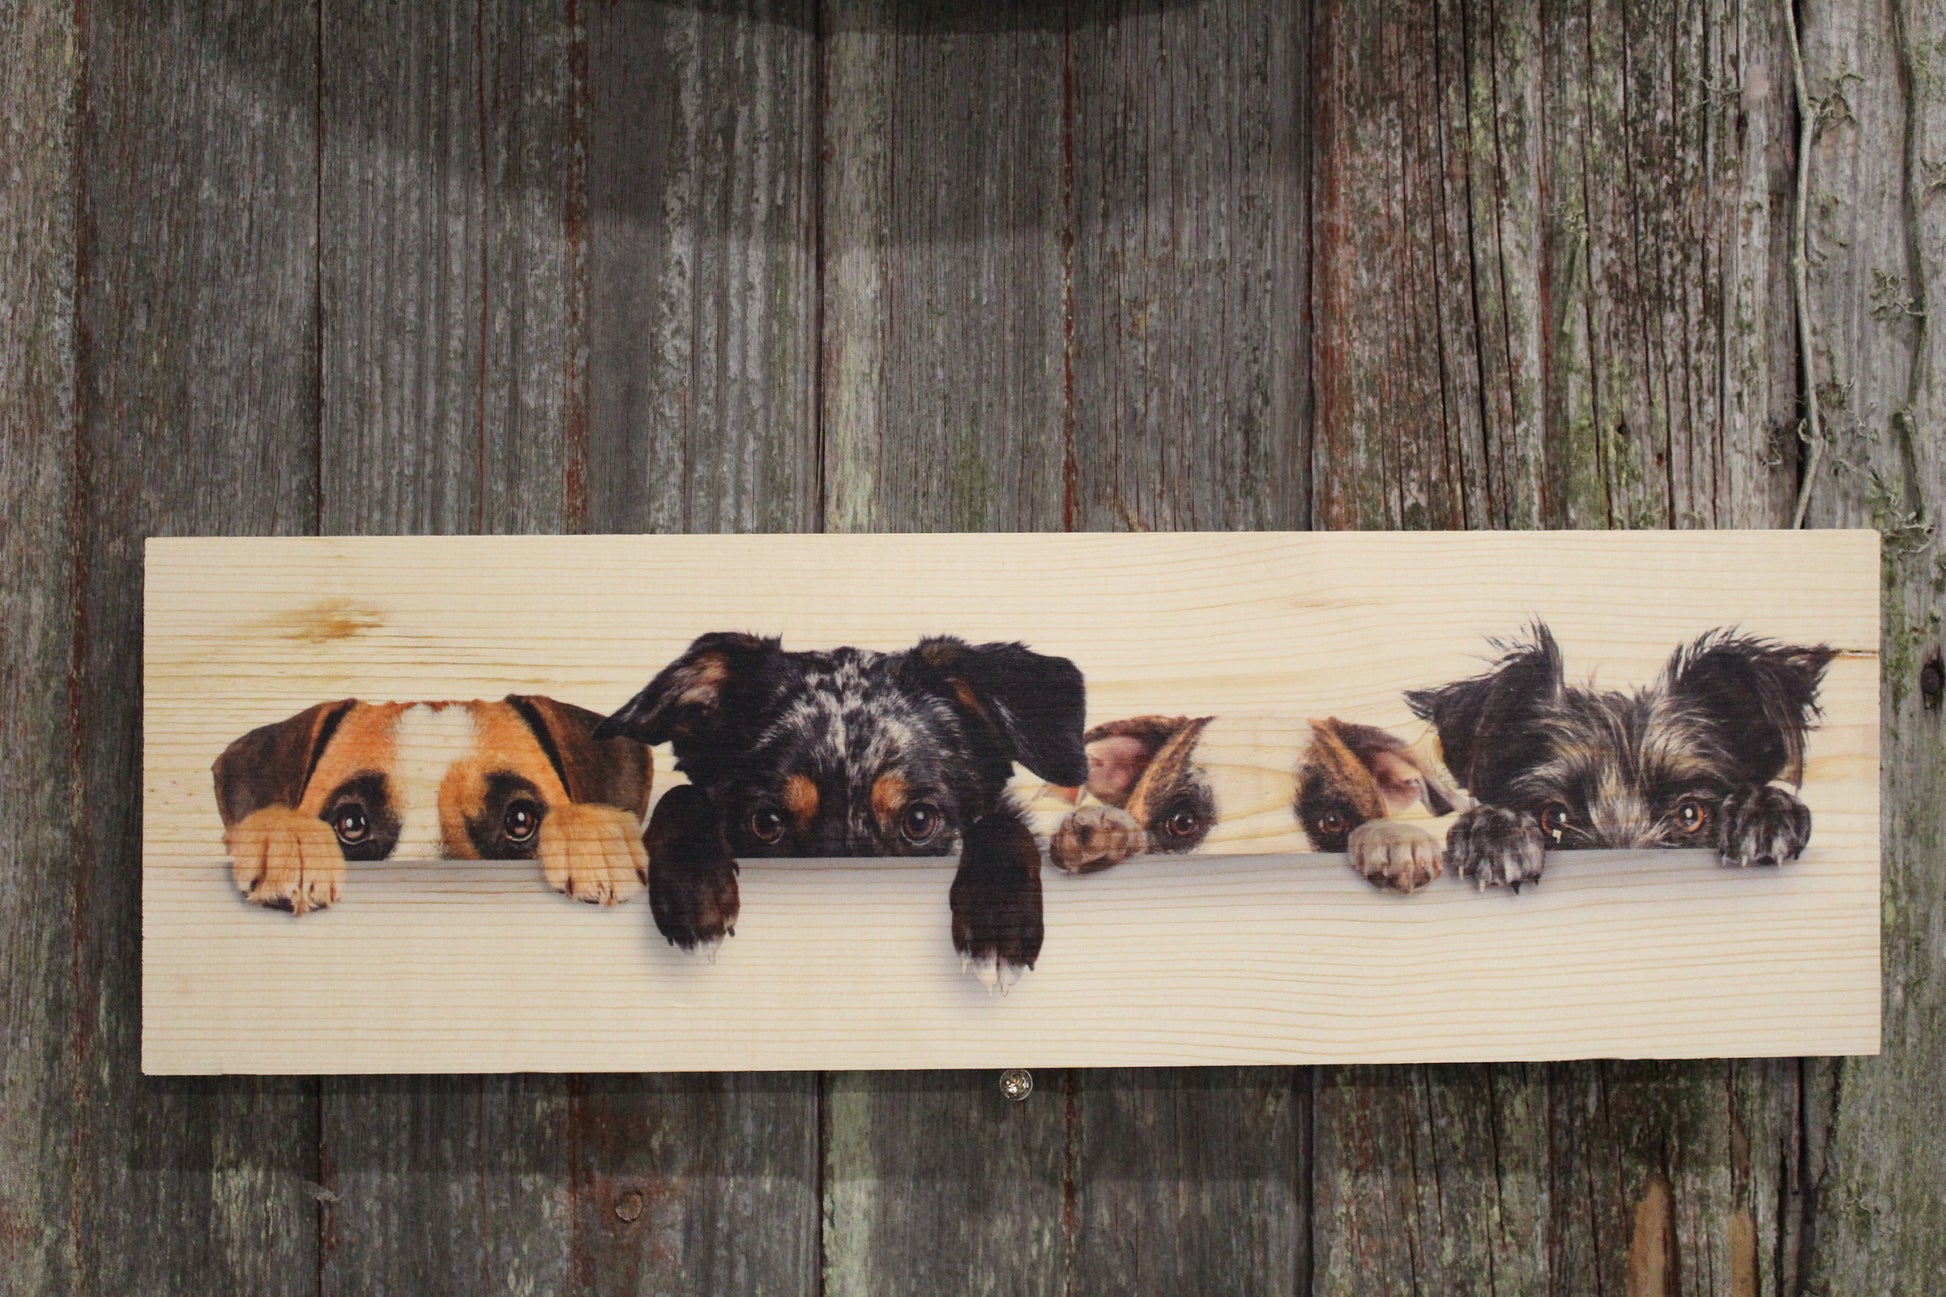 Dogs Wood Sign Faces Peeking Over Boxer Terrier Bull Dog Blue Heeler Puppy Picture Wall Decor Hanging Art